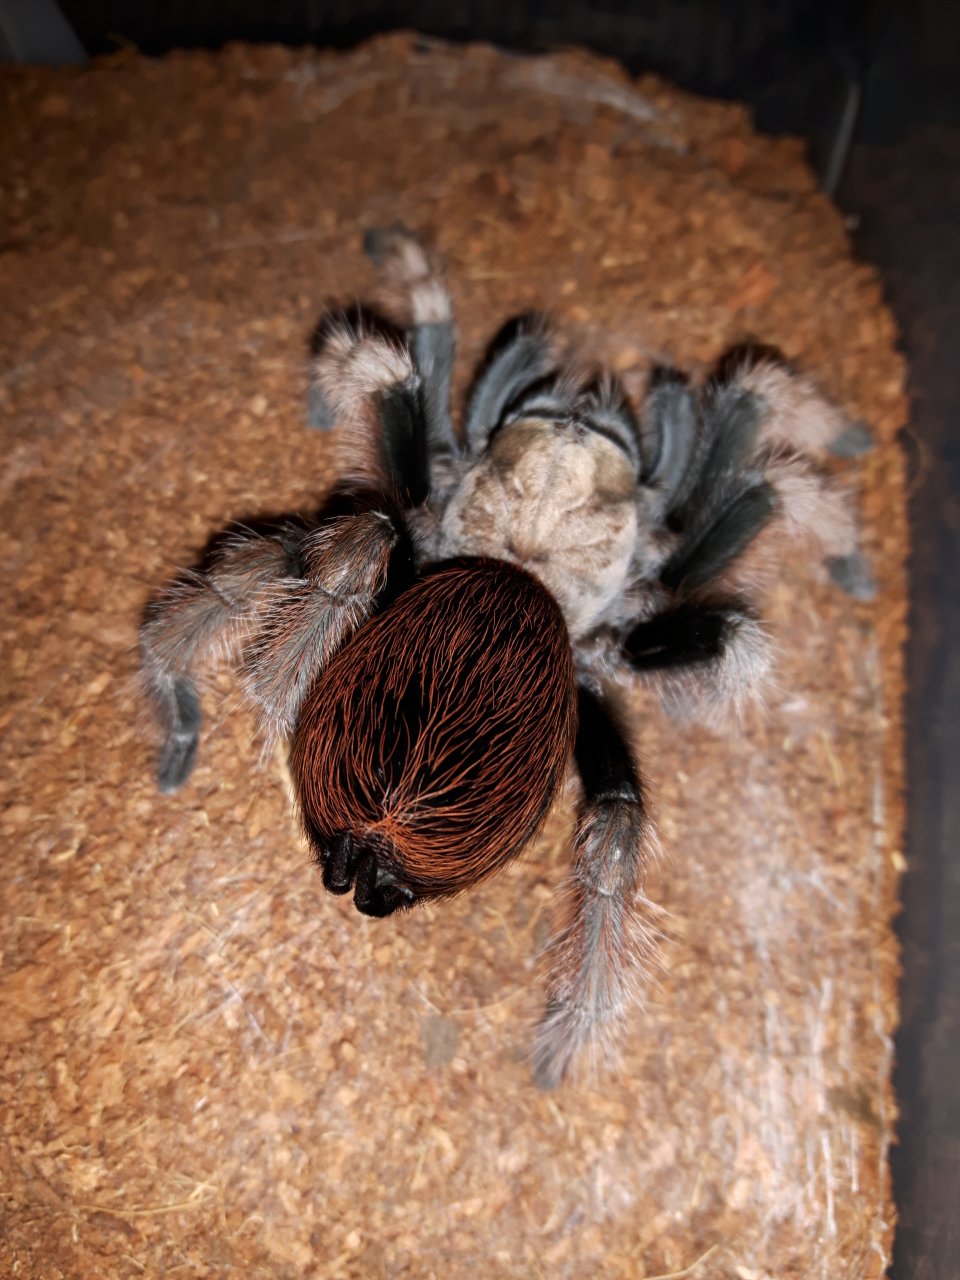 A.chalcodes